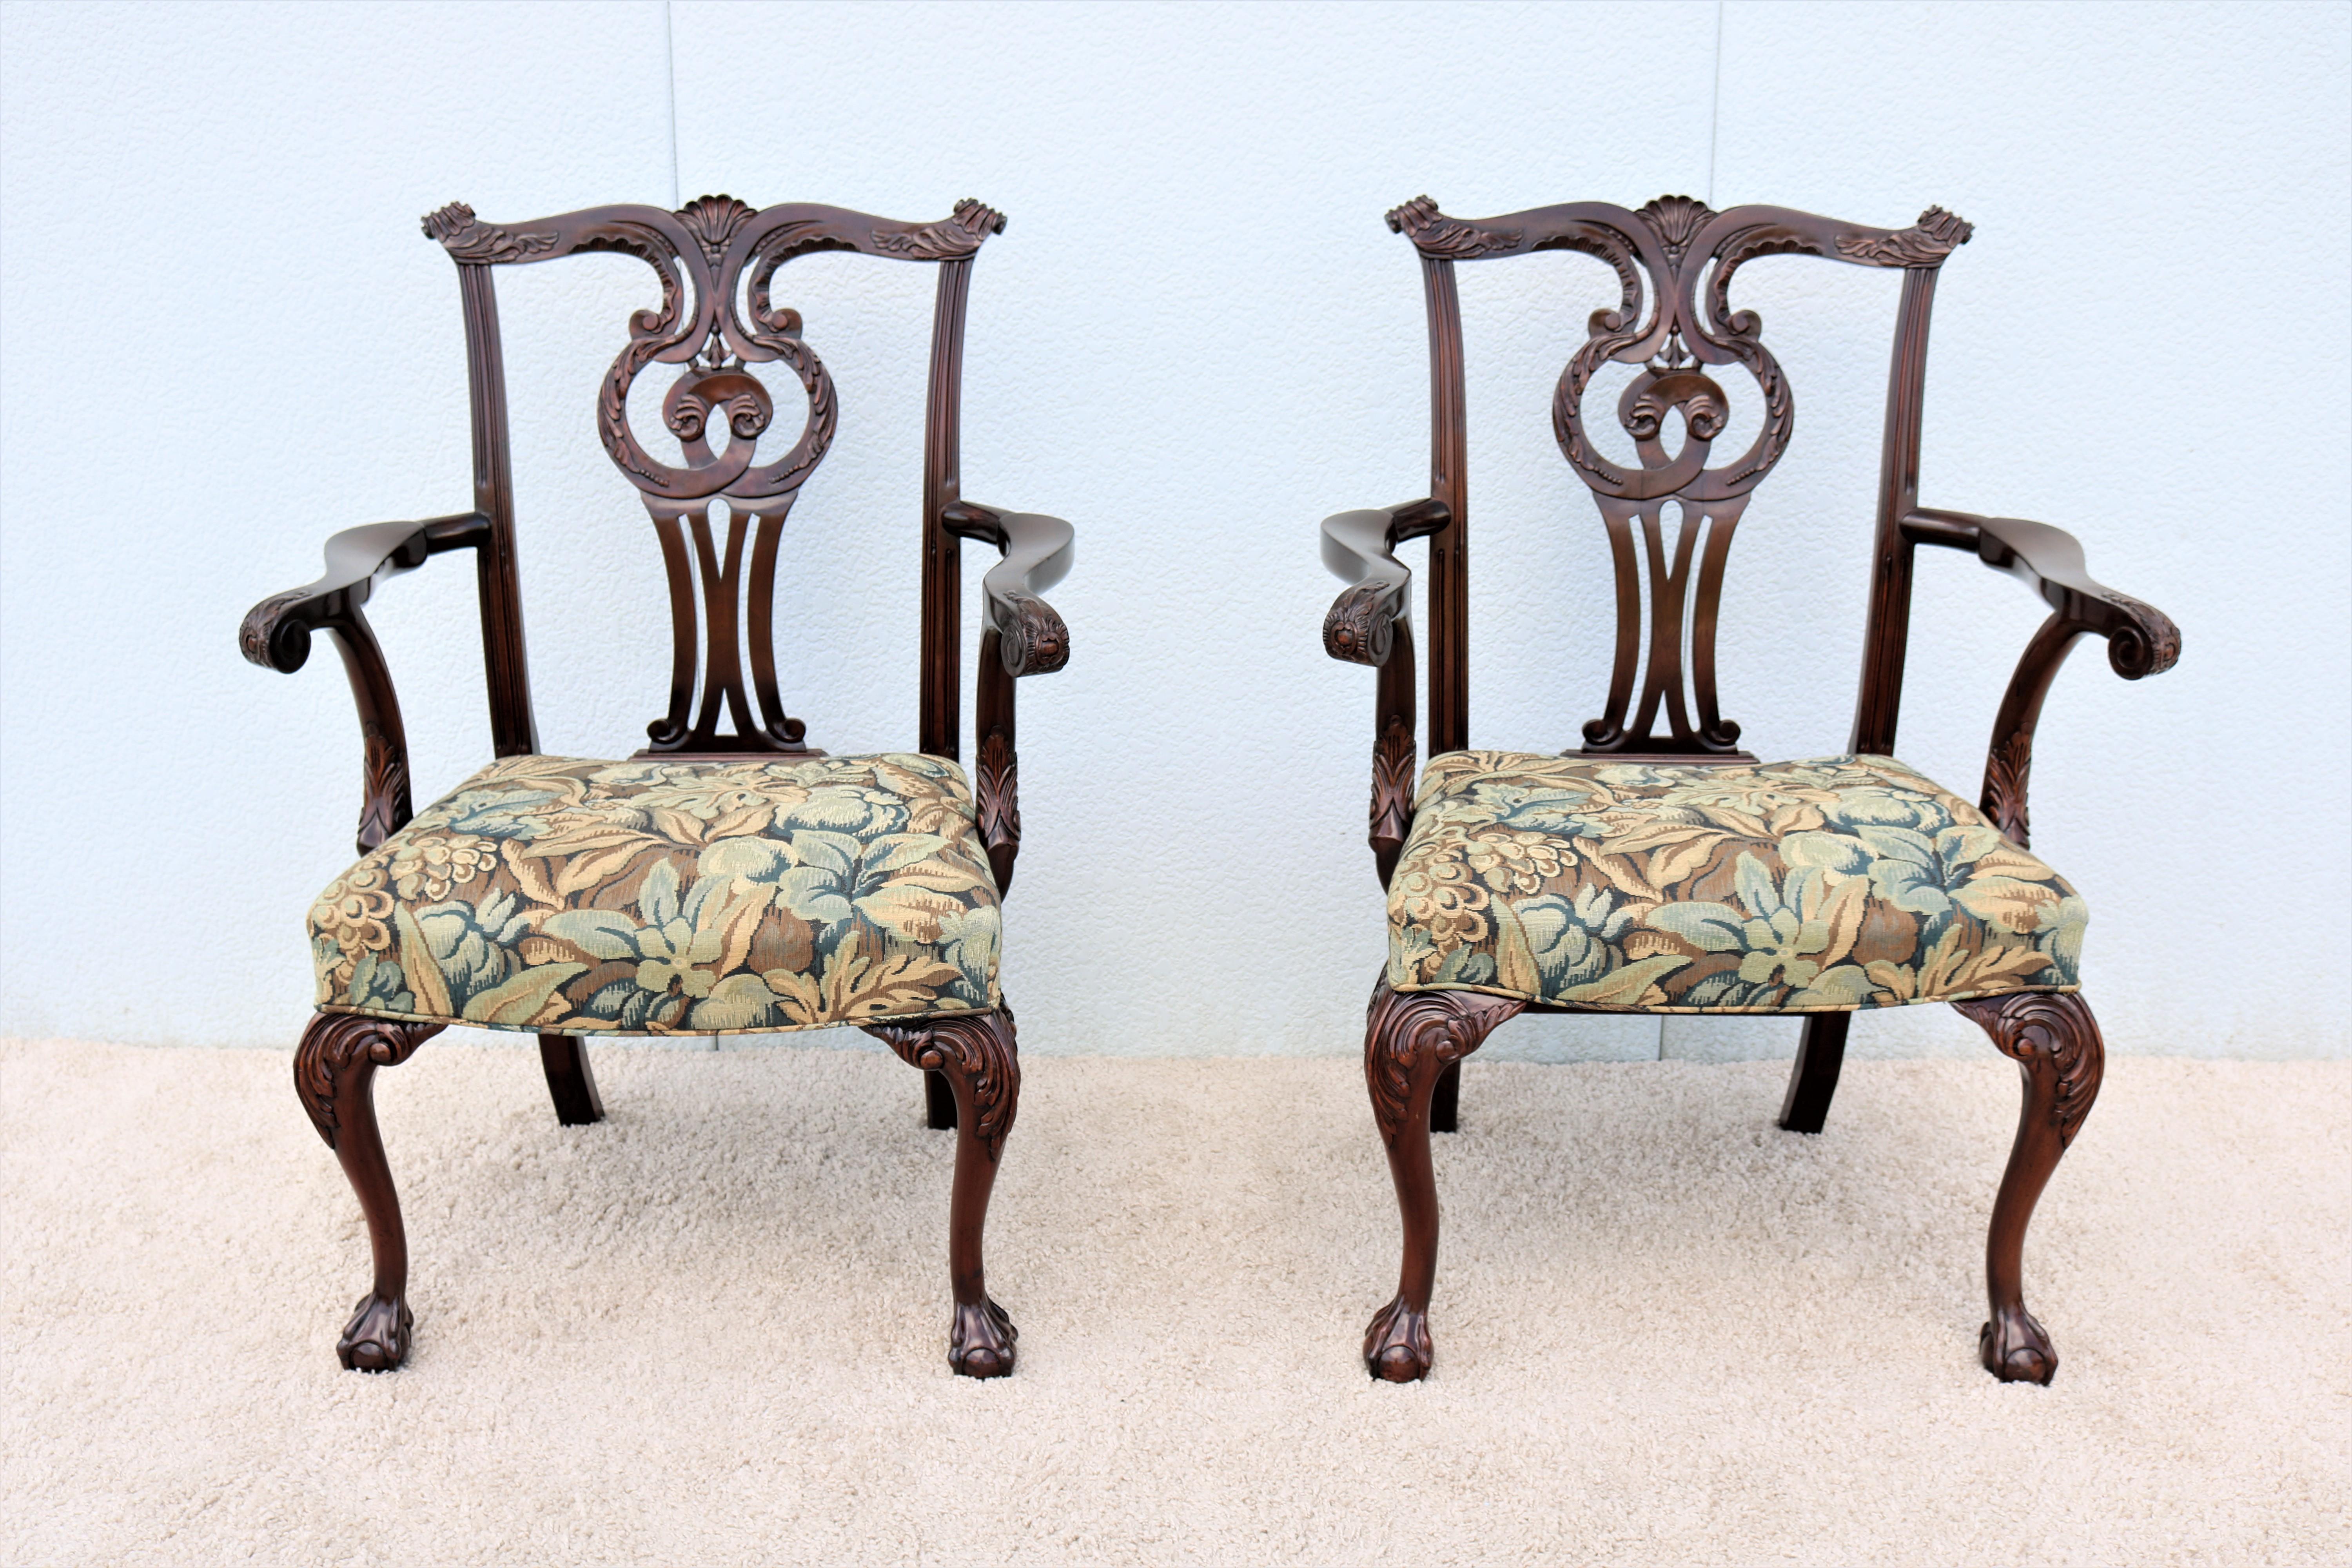 This fabulous traditional classic Chippendale open armchairs are exceptionally designed, and hand-crafted in the style of Thomas Chippendale, circa 1760.
Hand-carved walnut by skilled artisans using high-quality materials.
Features a shell-carved